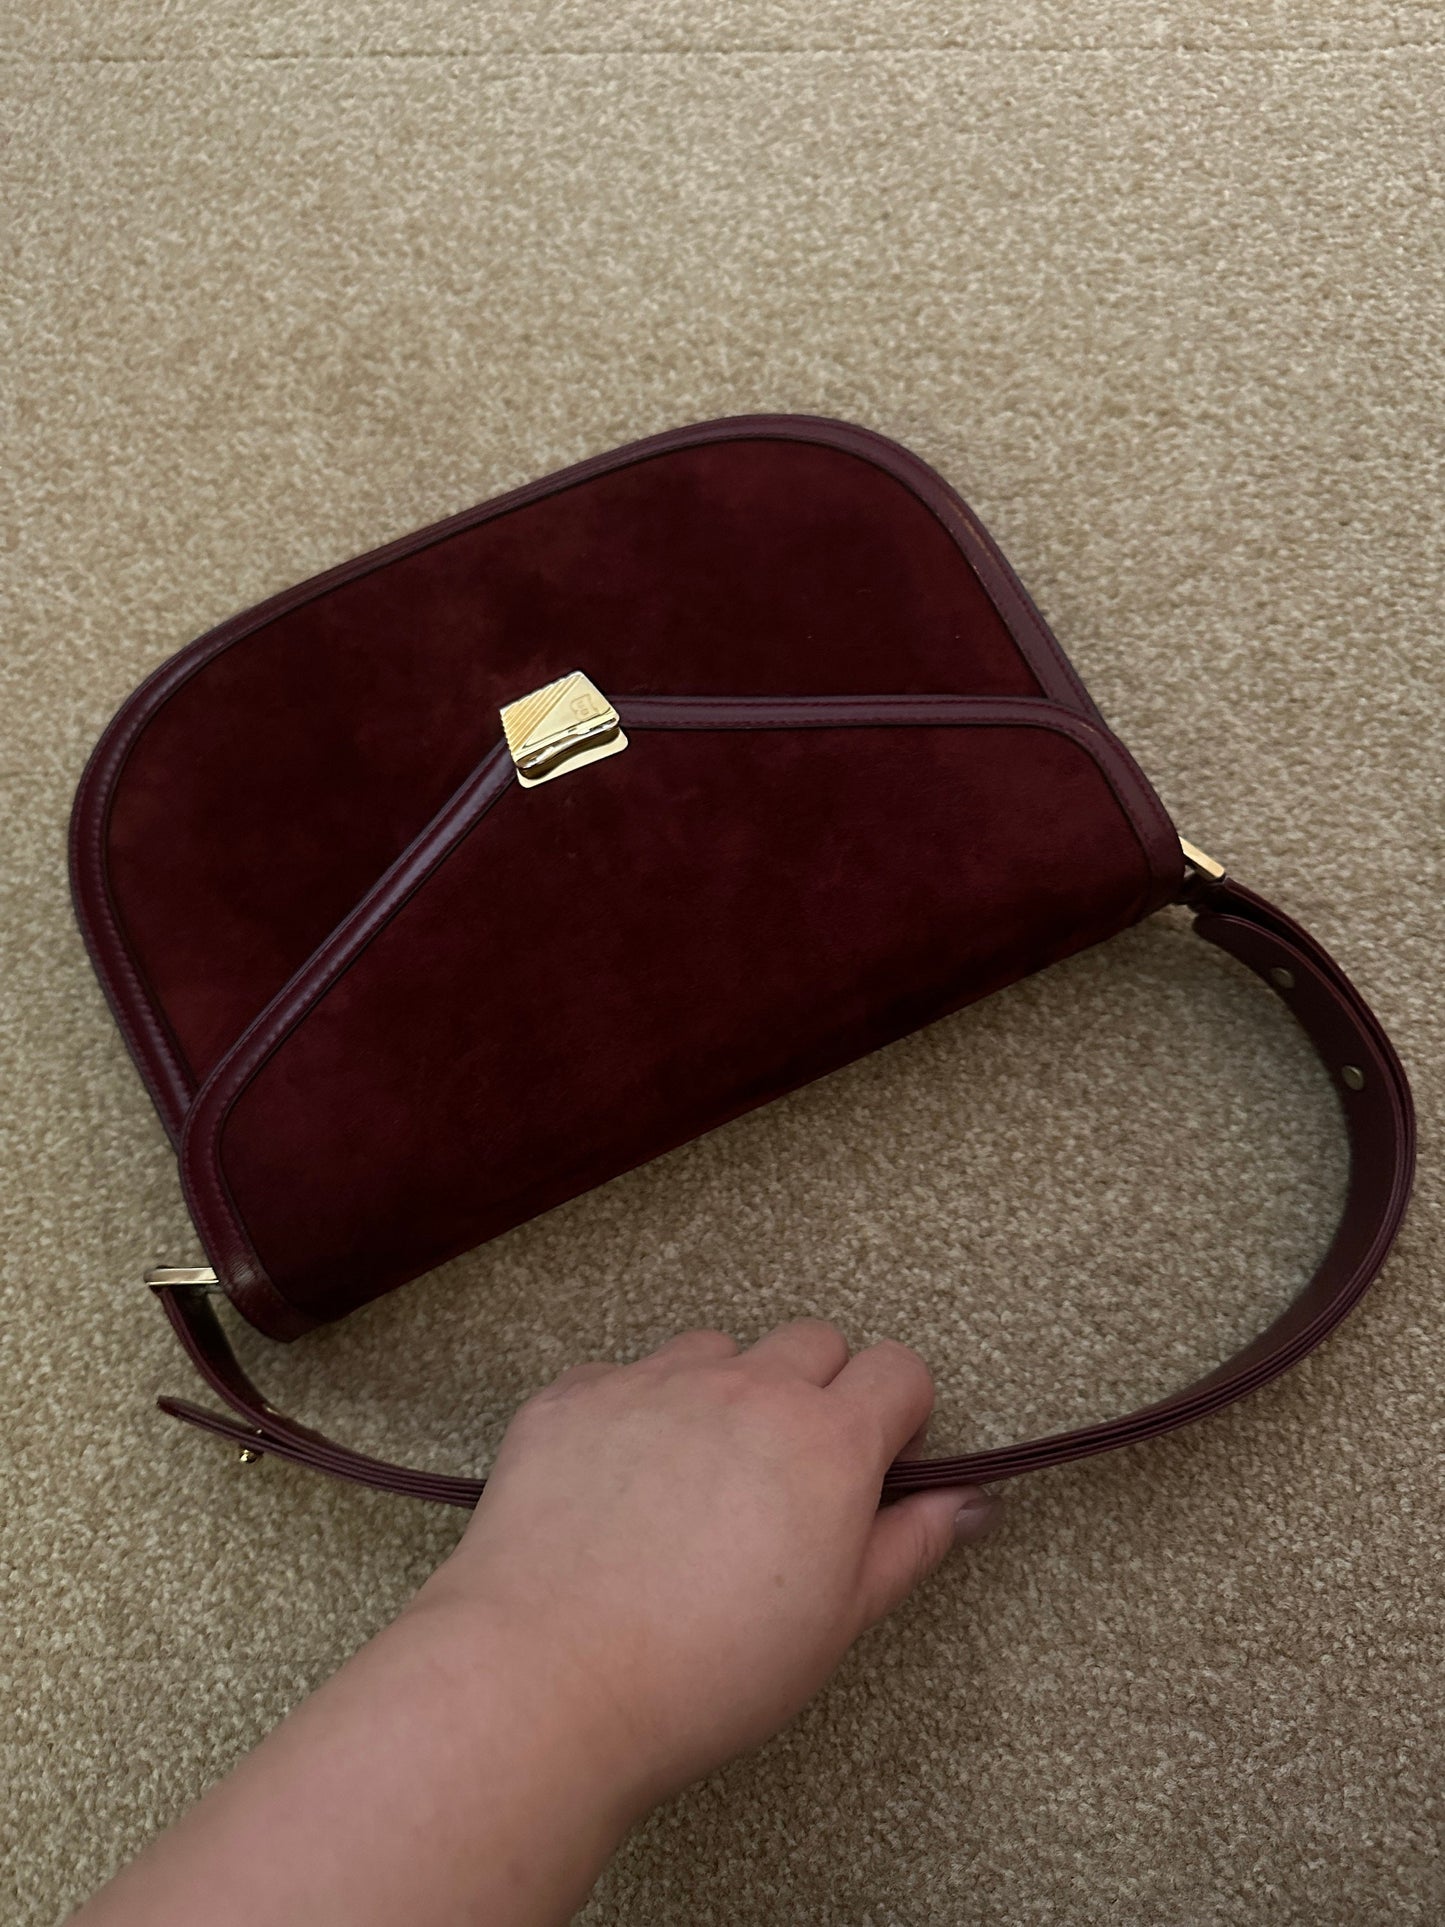 BALLY VINTAGE 100% Authentic Genuine Leather Hand Bag, Deep Red Color, 2000's, Great Condition, Rare